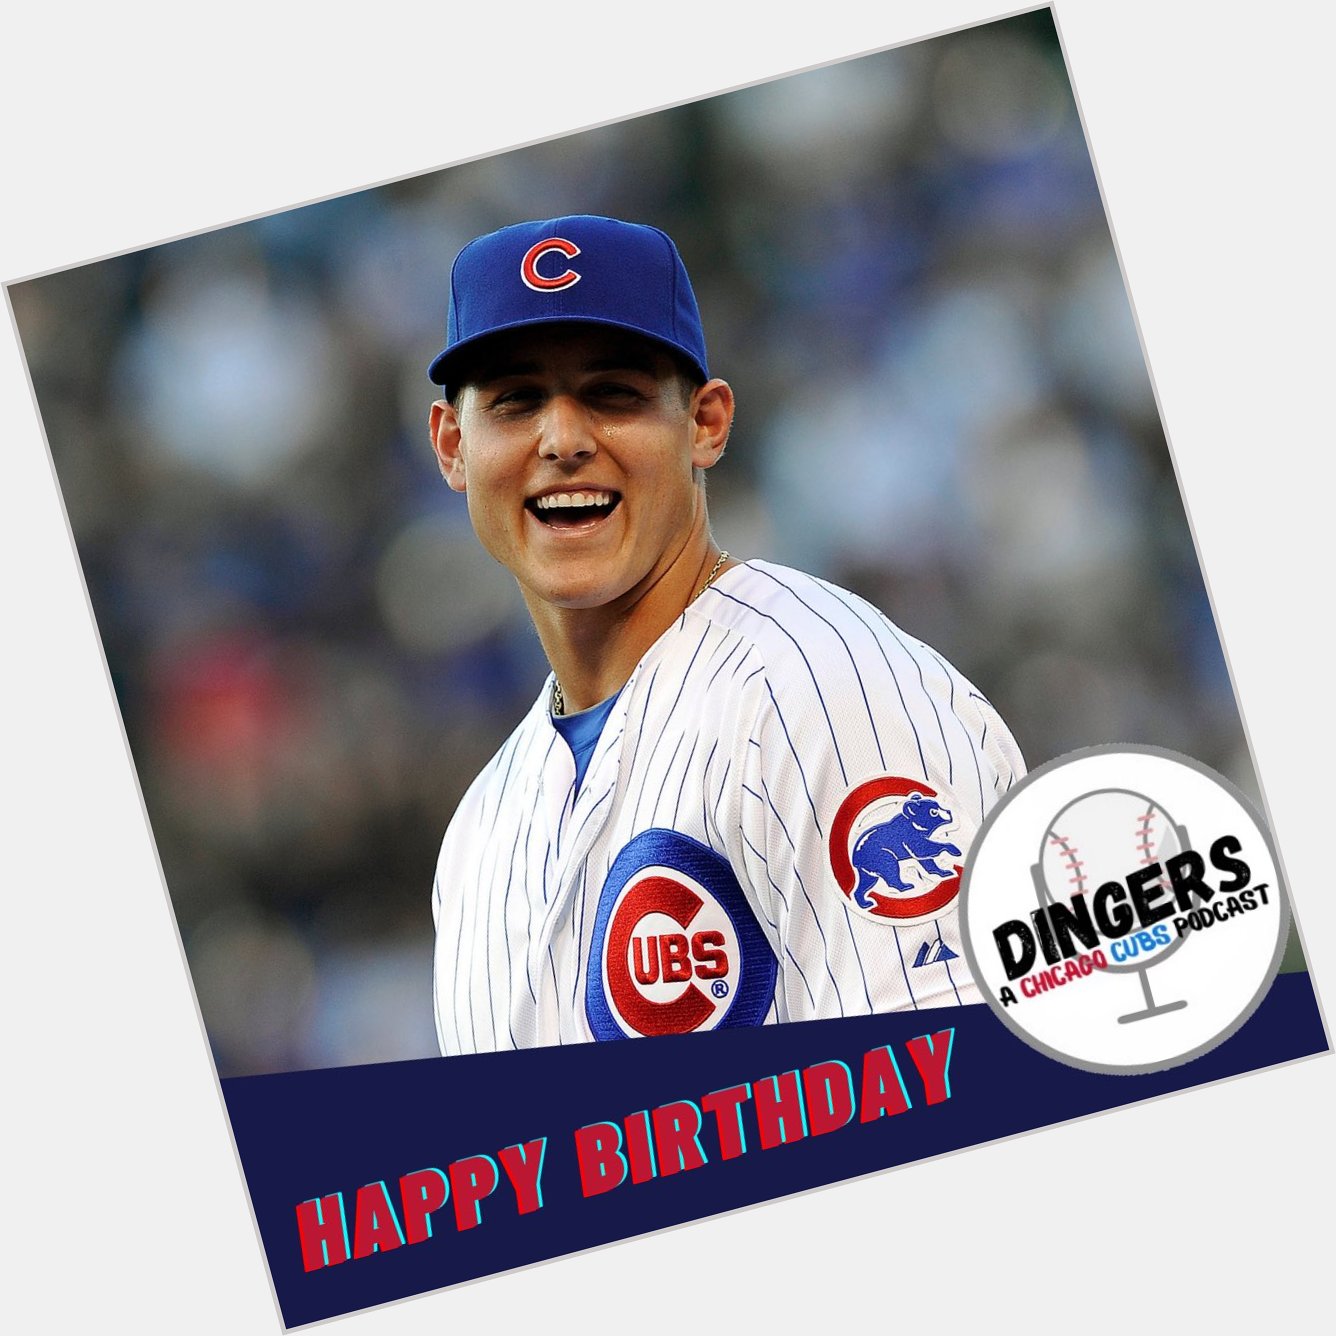 Happy Birthday to forever a Cub the legend. The Captain, TONY, Anthony Rizzo. 